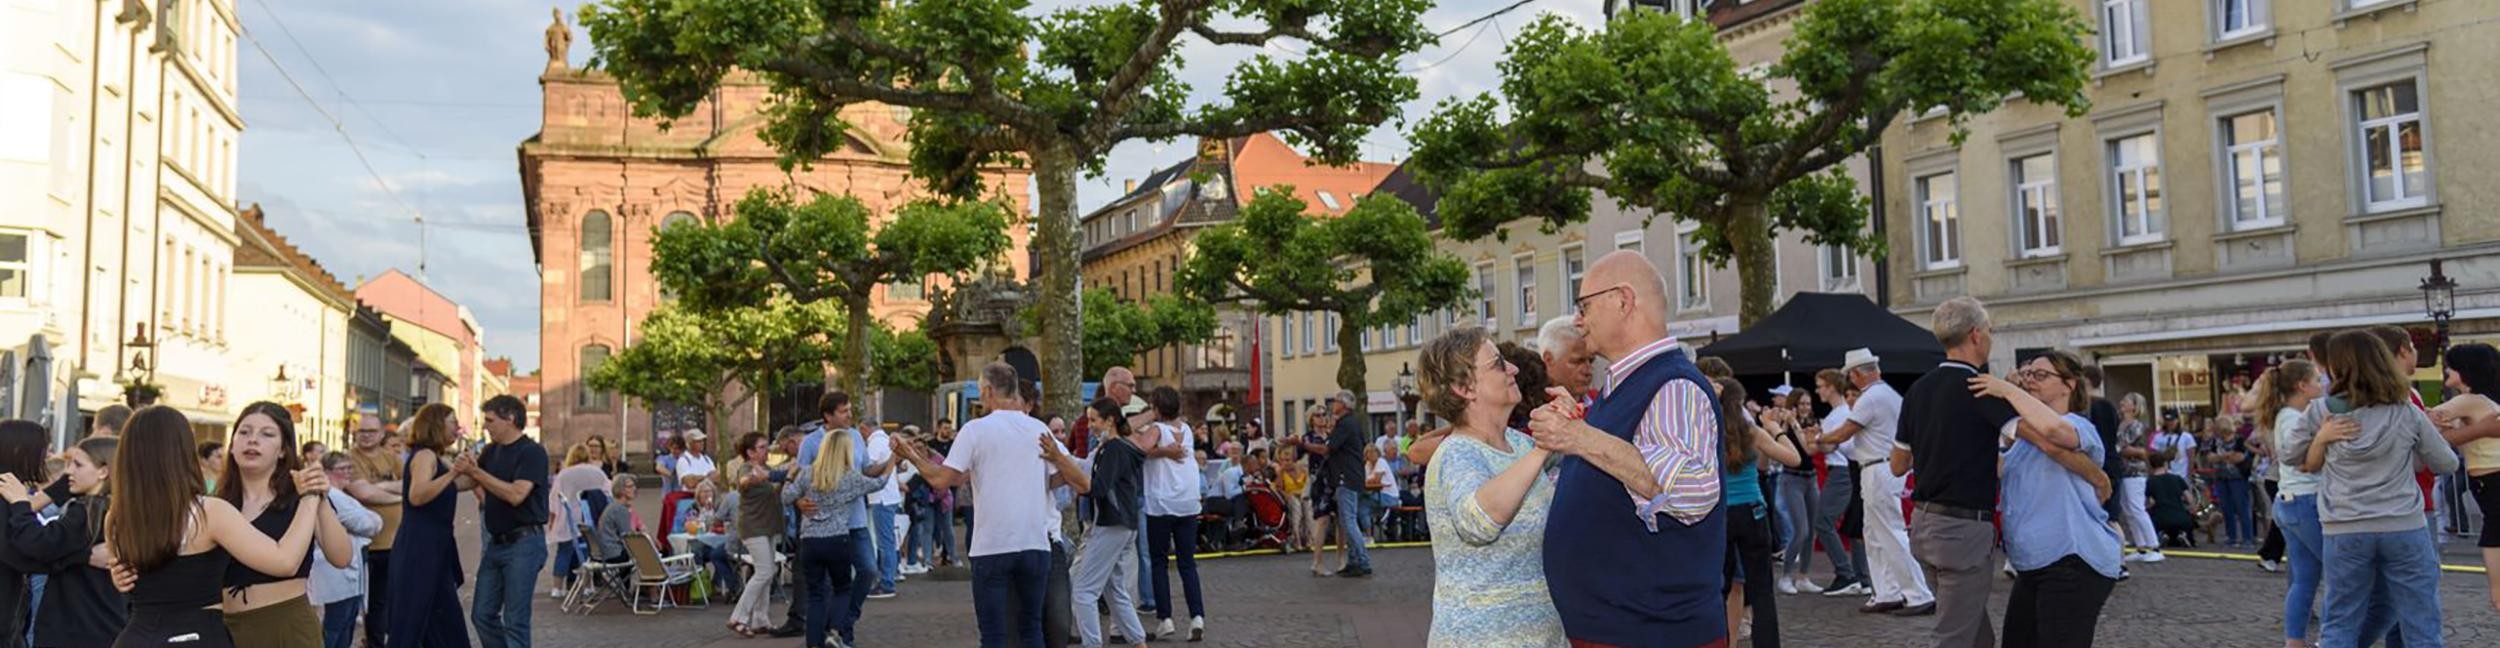 Dancing people on the market square during a dance under the plane trees